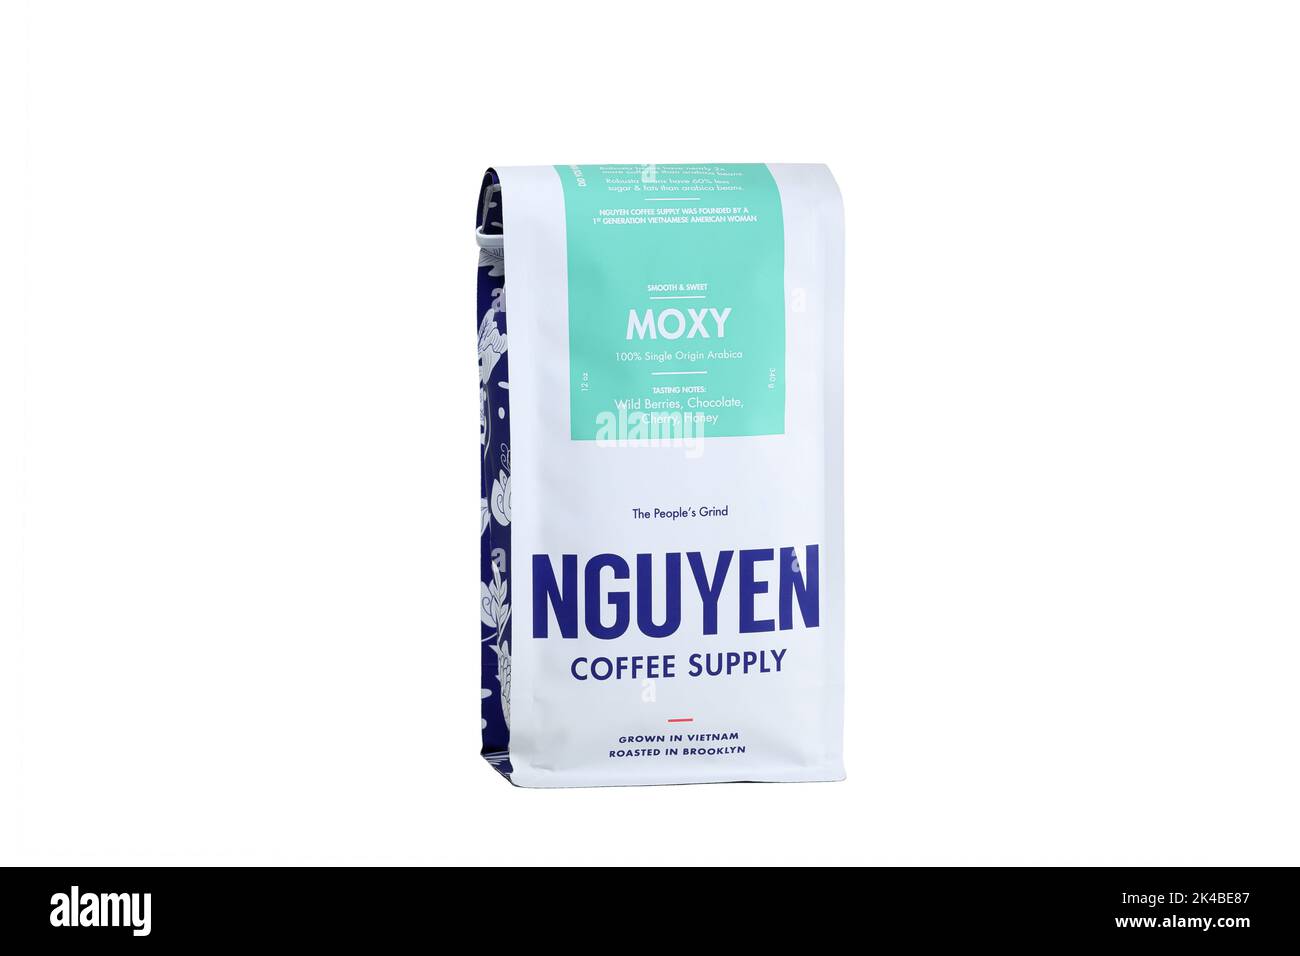 A bag of Nguyen Coffee Supply 'Moxy' Vietnamese coffee isolated on a white background. cutout image for illustration and editorial use. Stock Photo